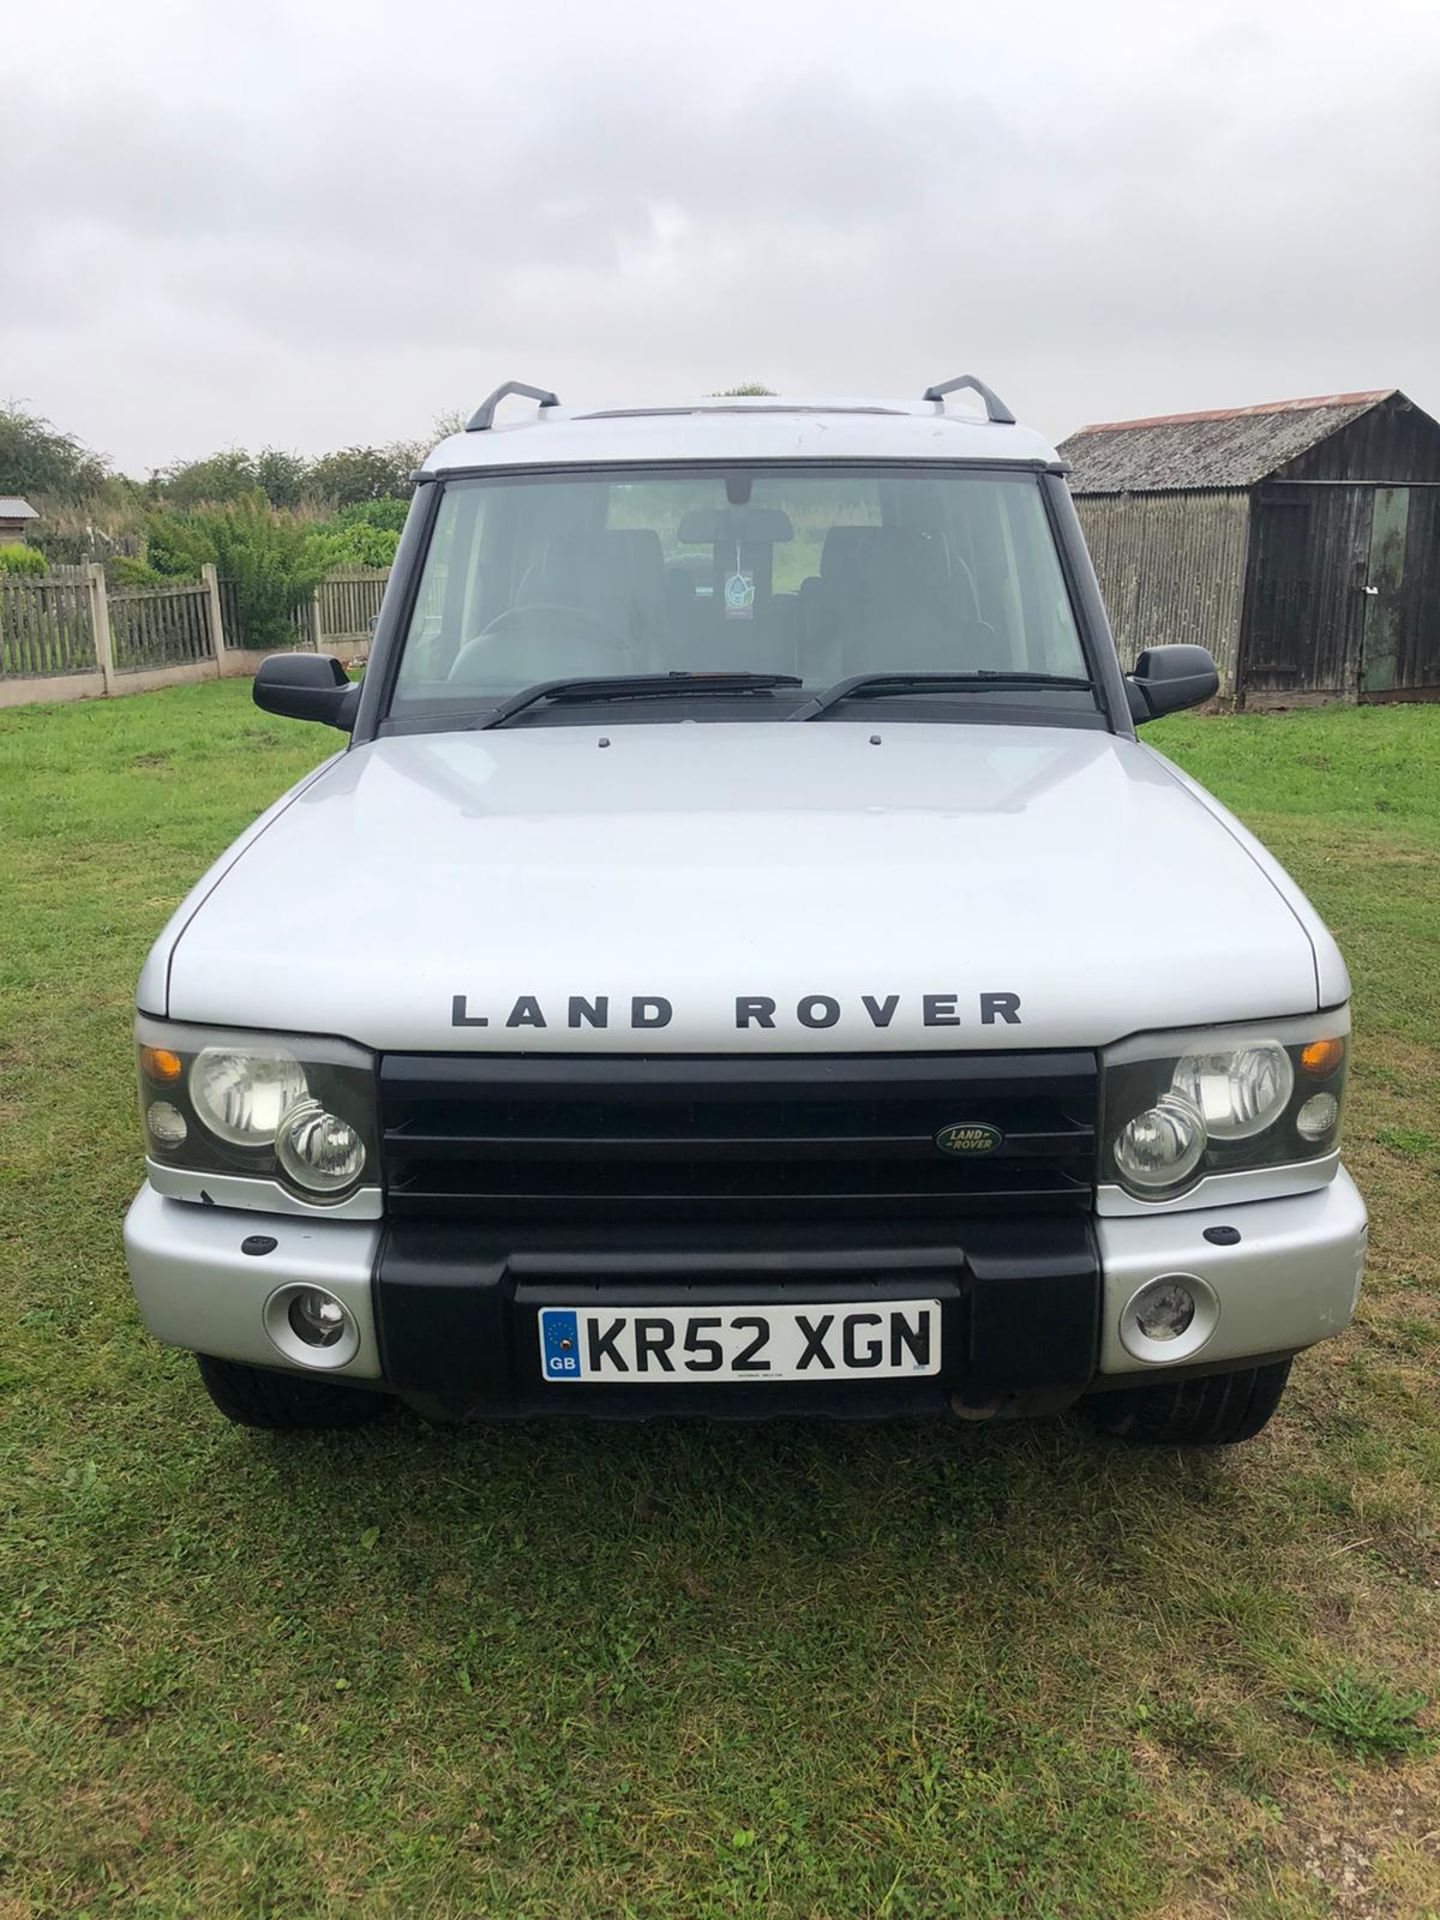 2002 LAND ROVER DISCOVERY TD5 ES AUTO SILVER 7 SEATER ESTATE, 2.5 DIESEL, 160K MILES *NO VAT* - Image 2 of 18